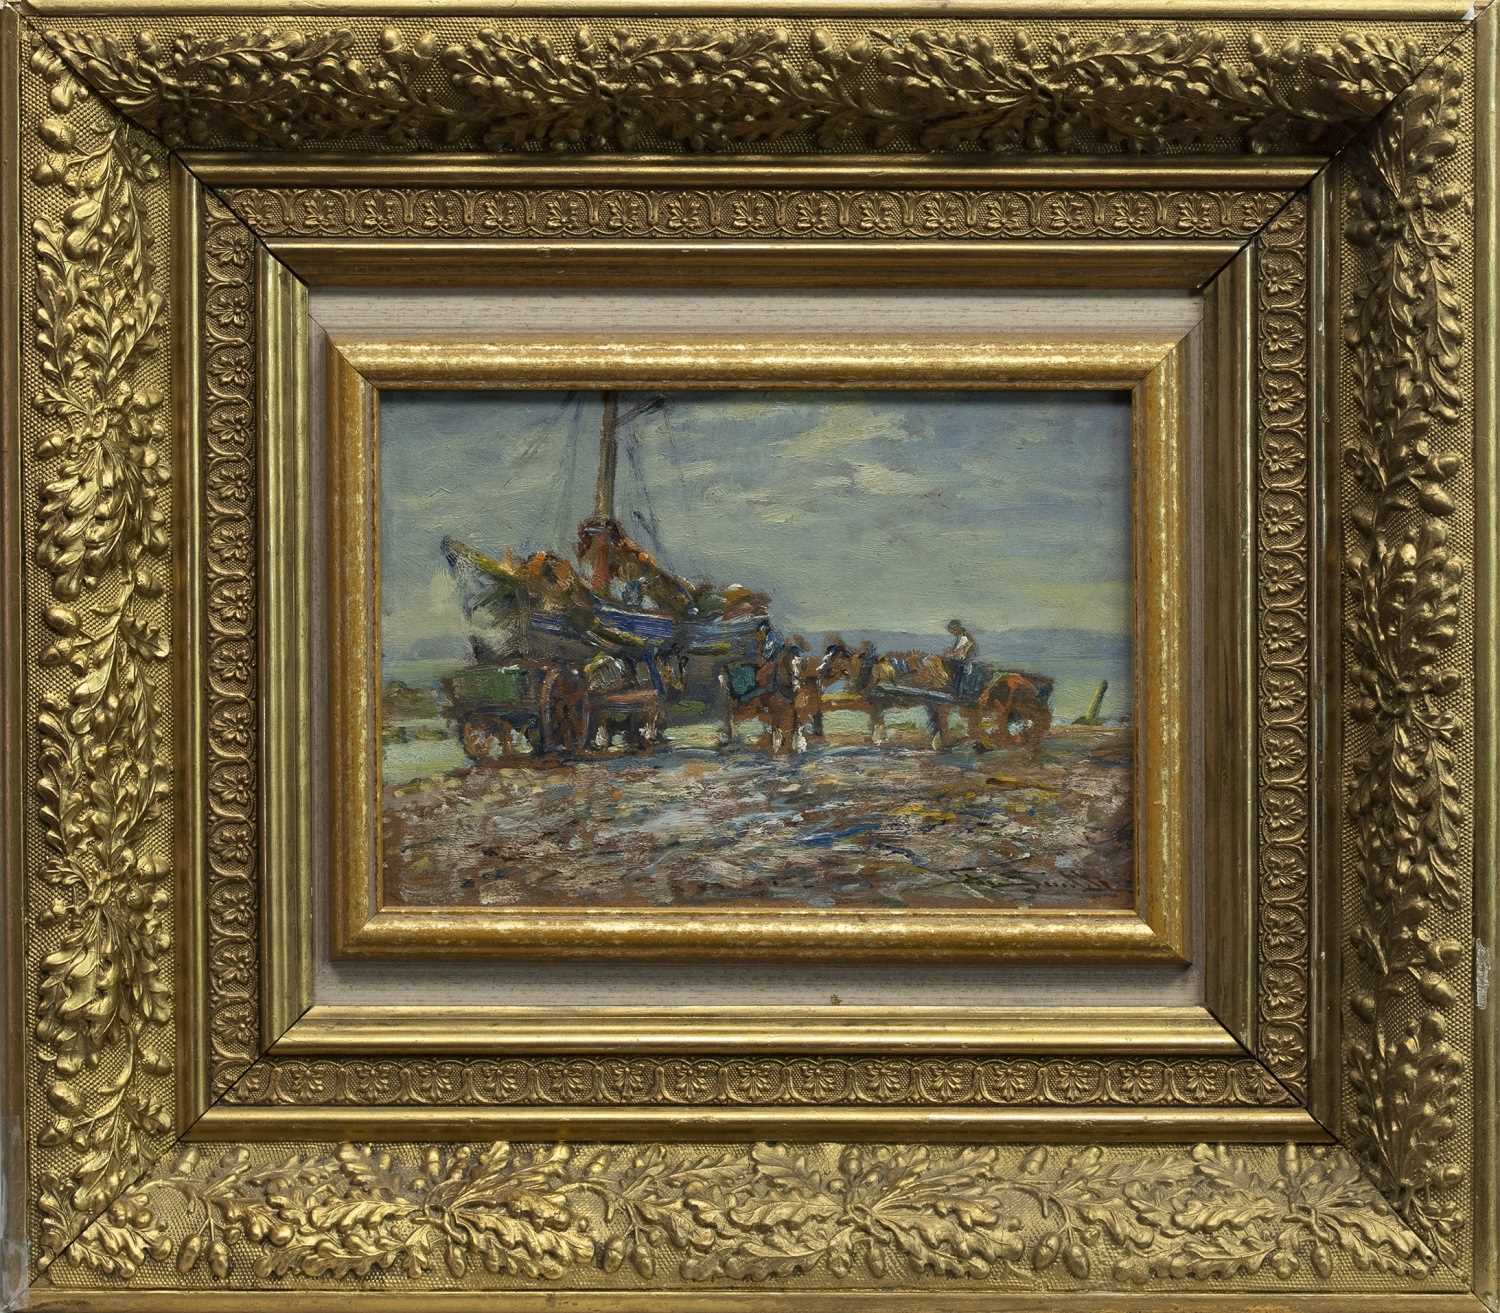 Lot 113 - UNLOADING THE CATCH, AN OIL BY GEORGE SMITH